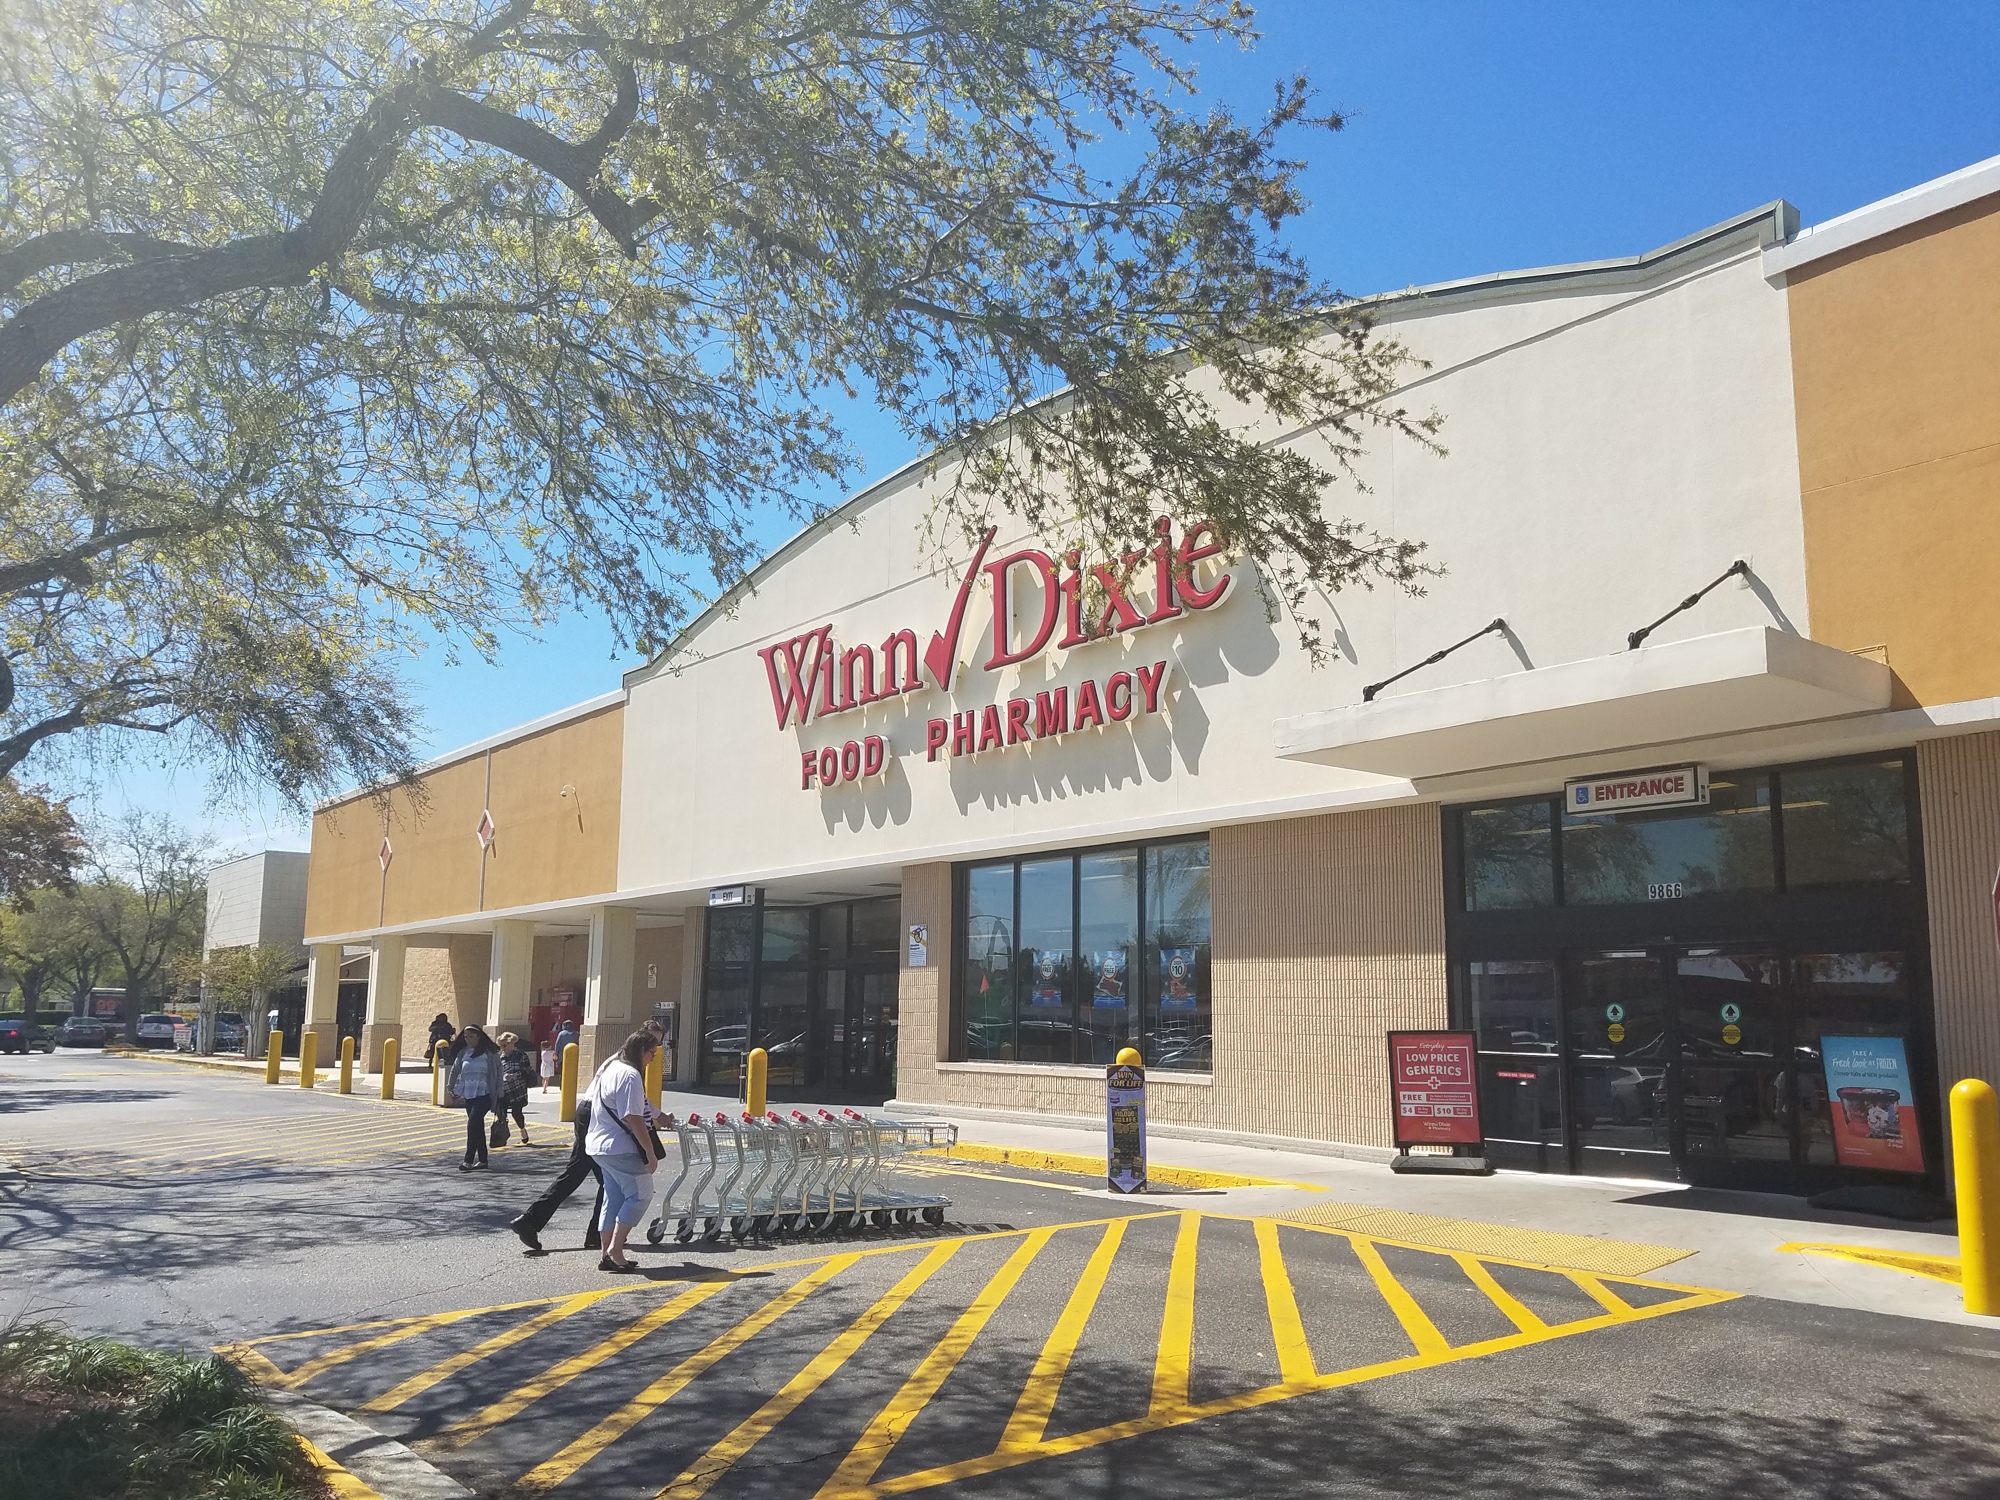 Rowe’s IGA supermarket chain owner Rob Rowe bought the closed Winn-Dixie at 9866 Baymeadows Road for $3.7 million.